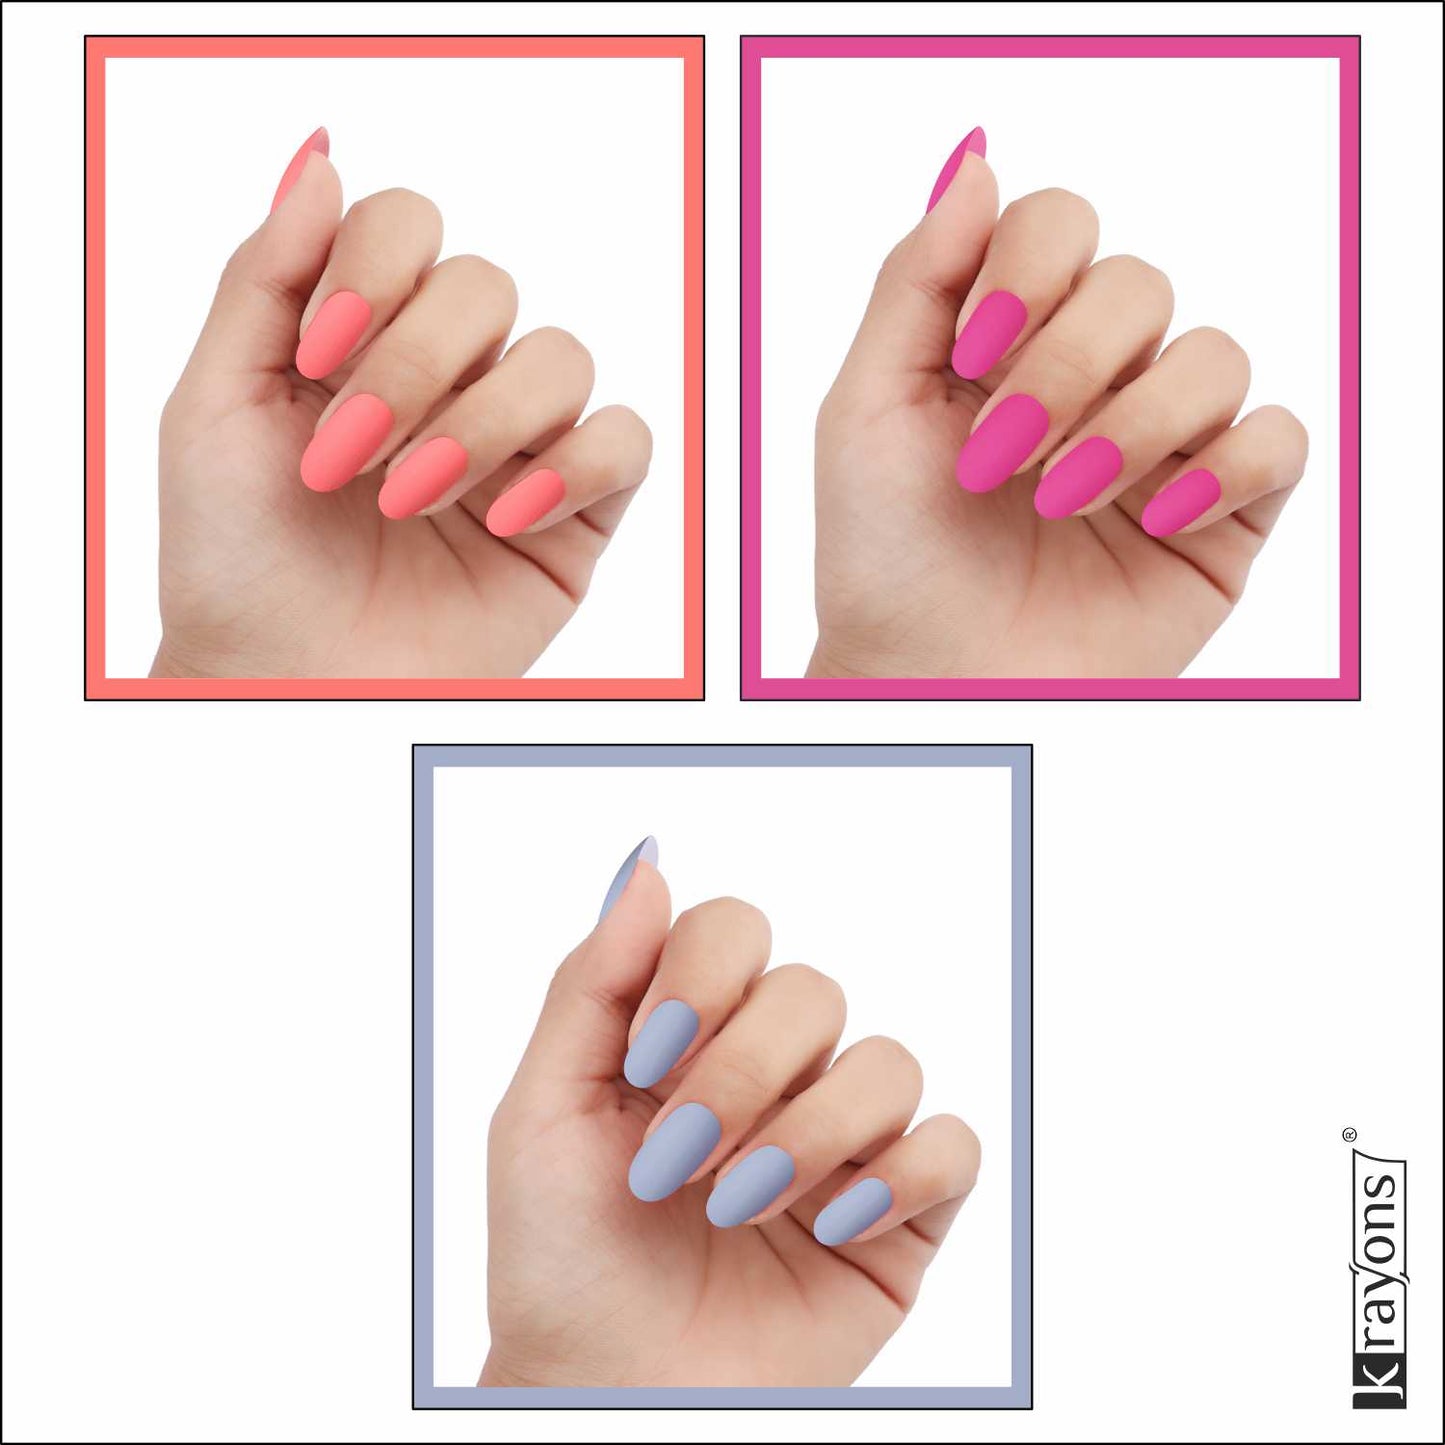 Krayons Cute Super Matte Finish Nail Enamel, Quick Dry, LongLasting, Blossom Peach, Hot Pink, Ice Matte, 6ml Each (Pack of 3)